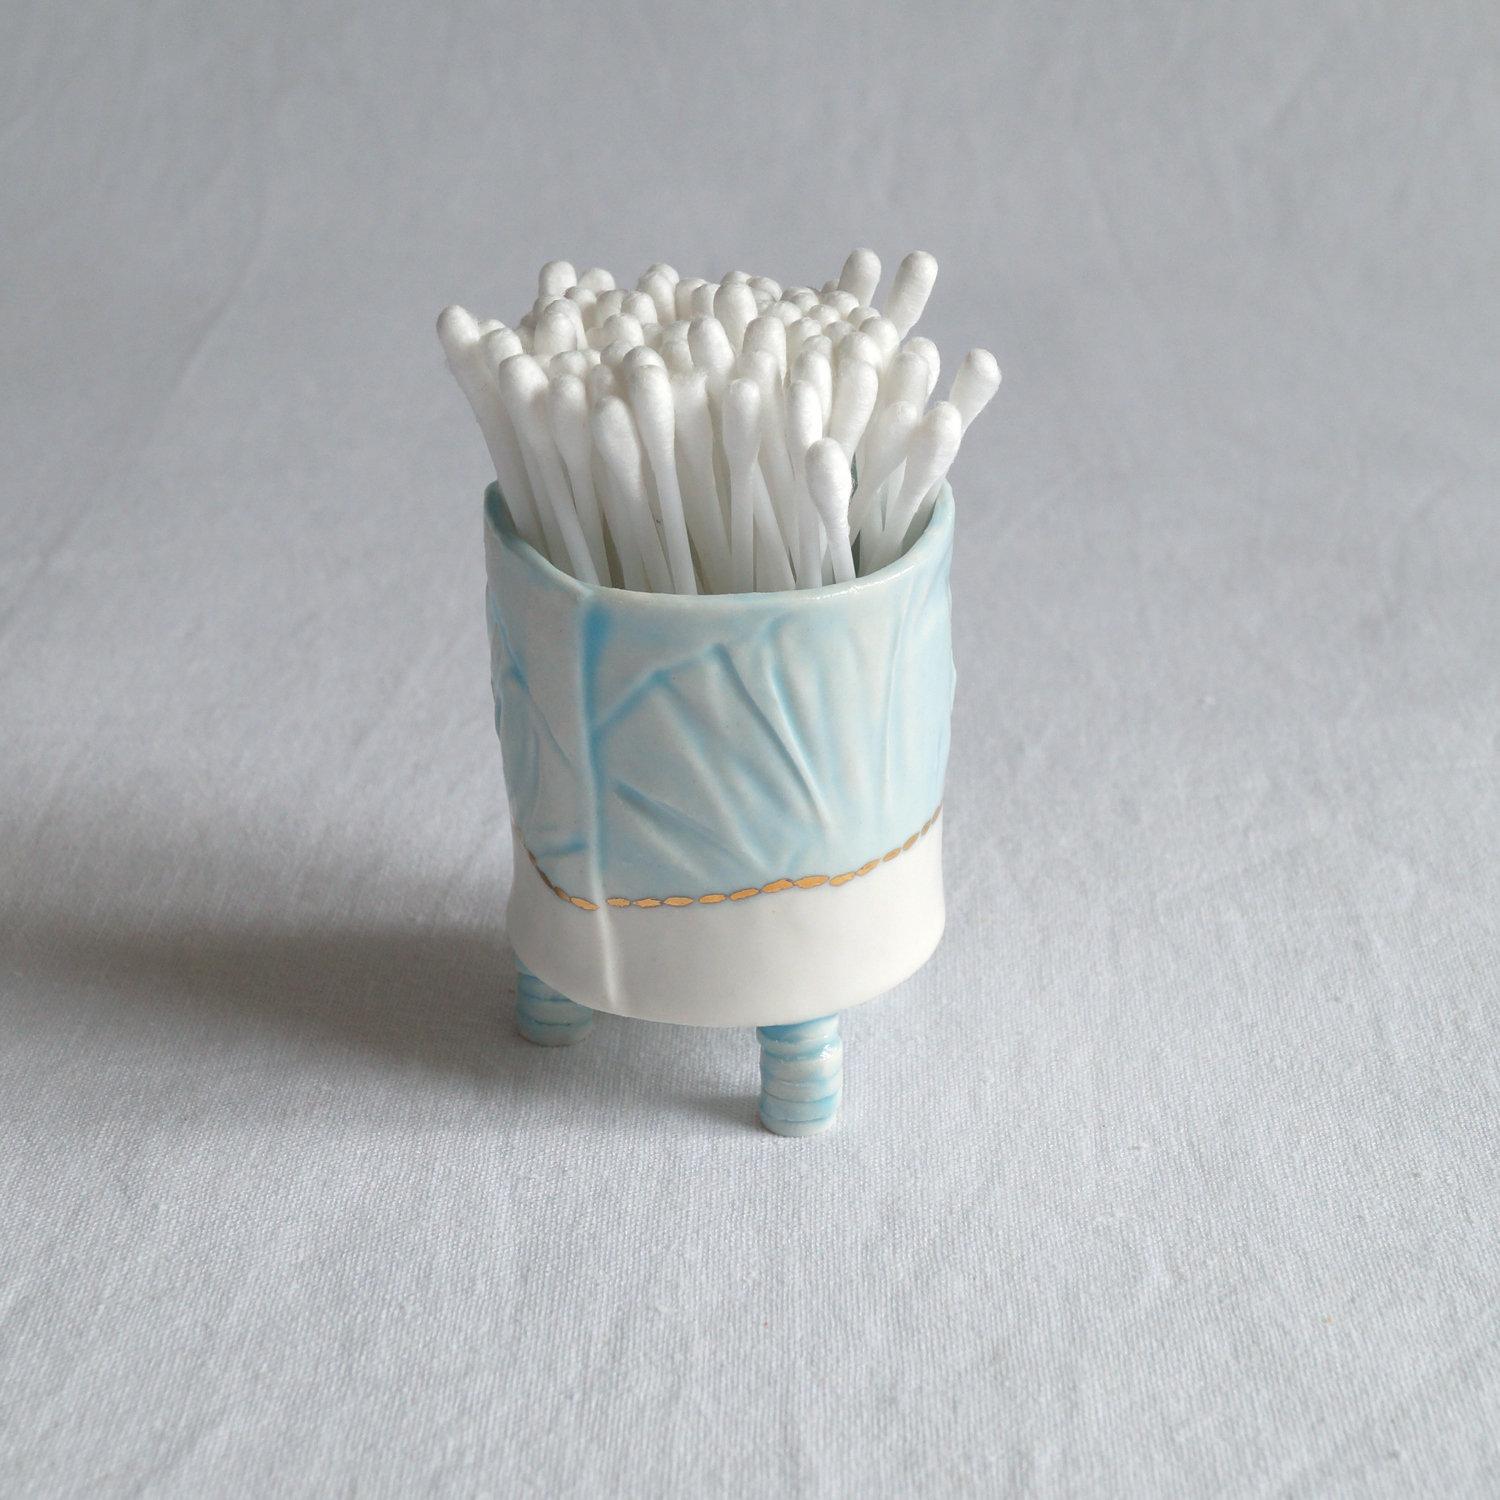 RUCHED No9, white porcelain, tea light holder, pottery 9th anniversary, china 2nd 20th anniversary, porcelain 18th anniversar